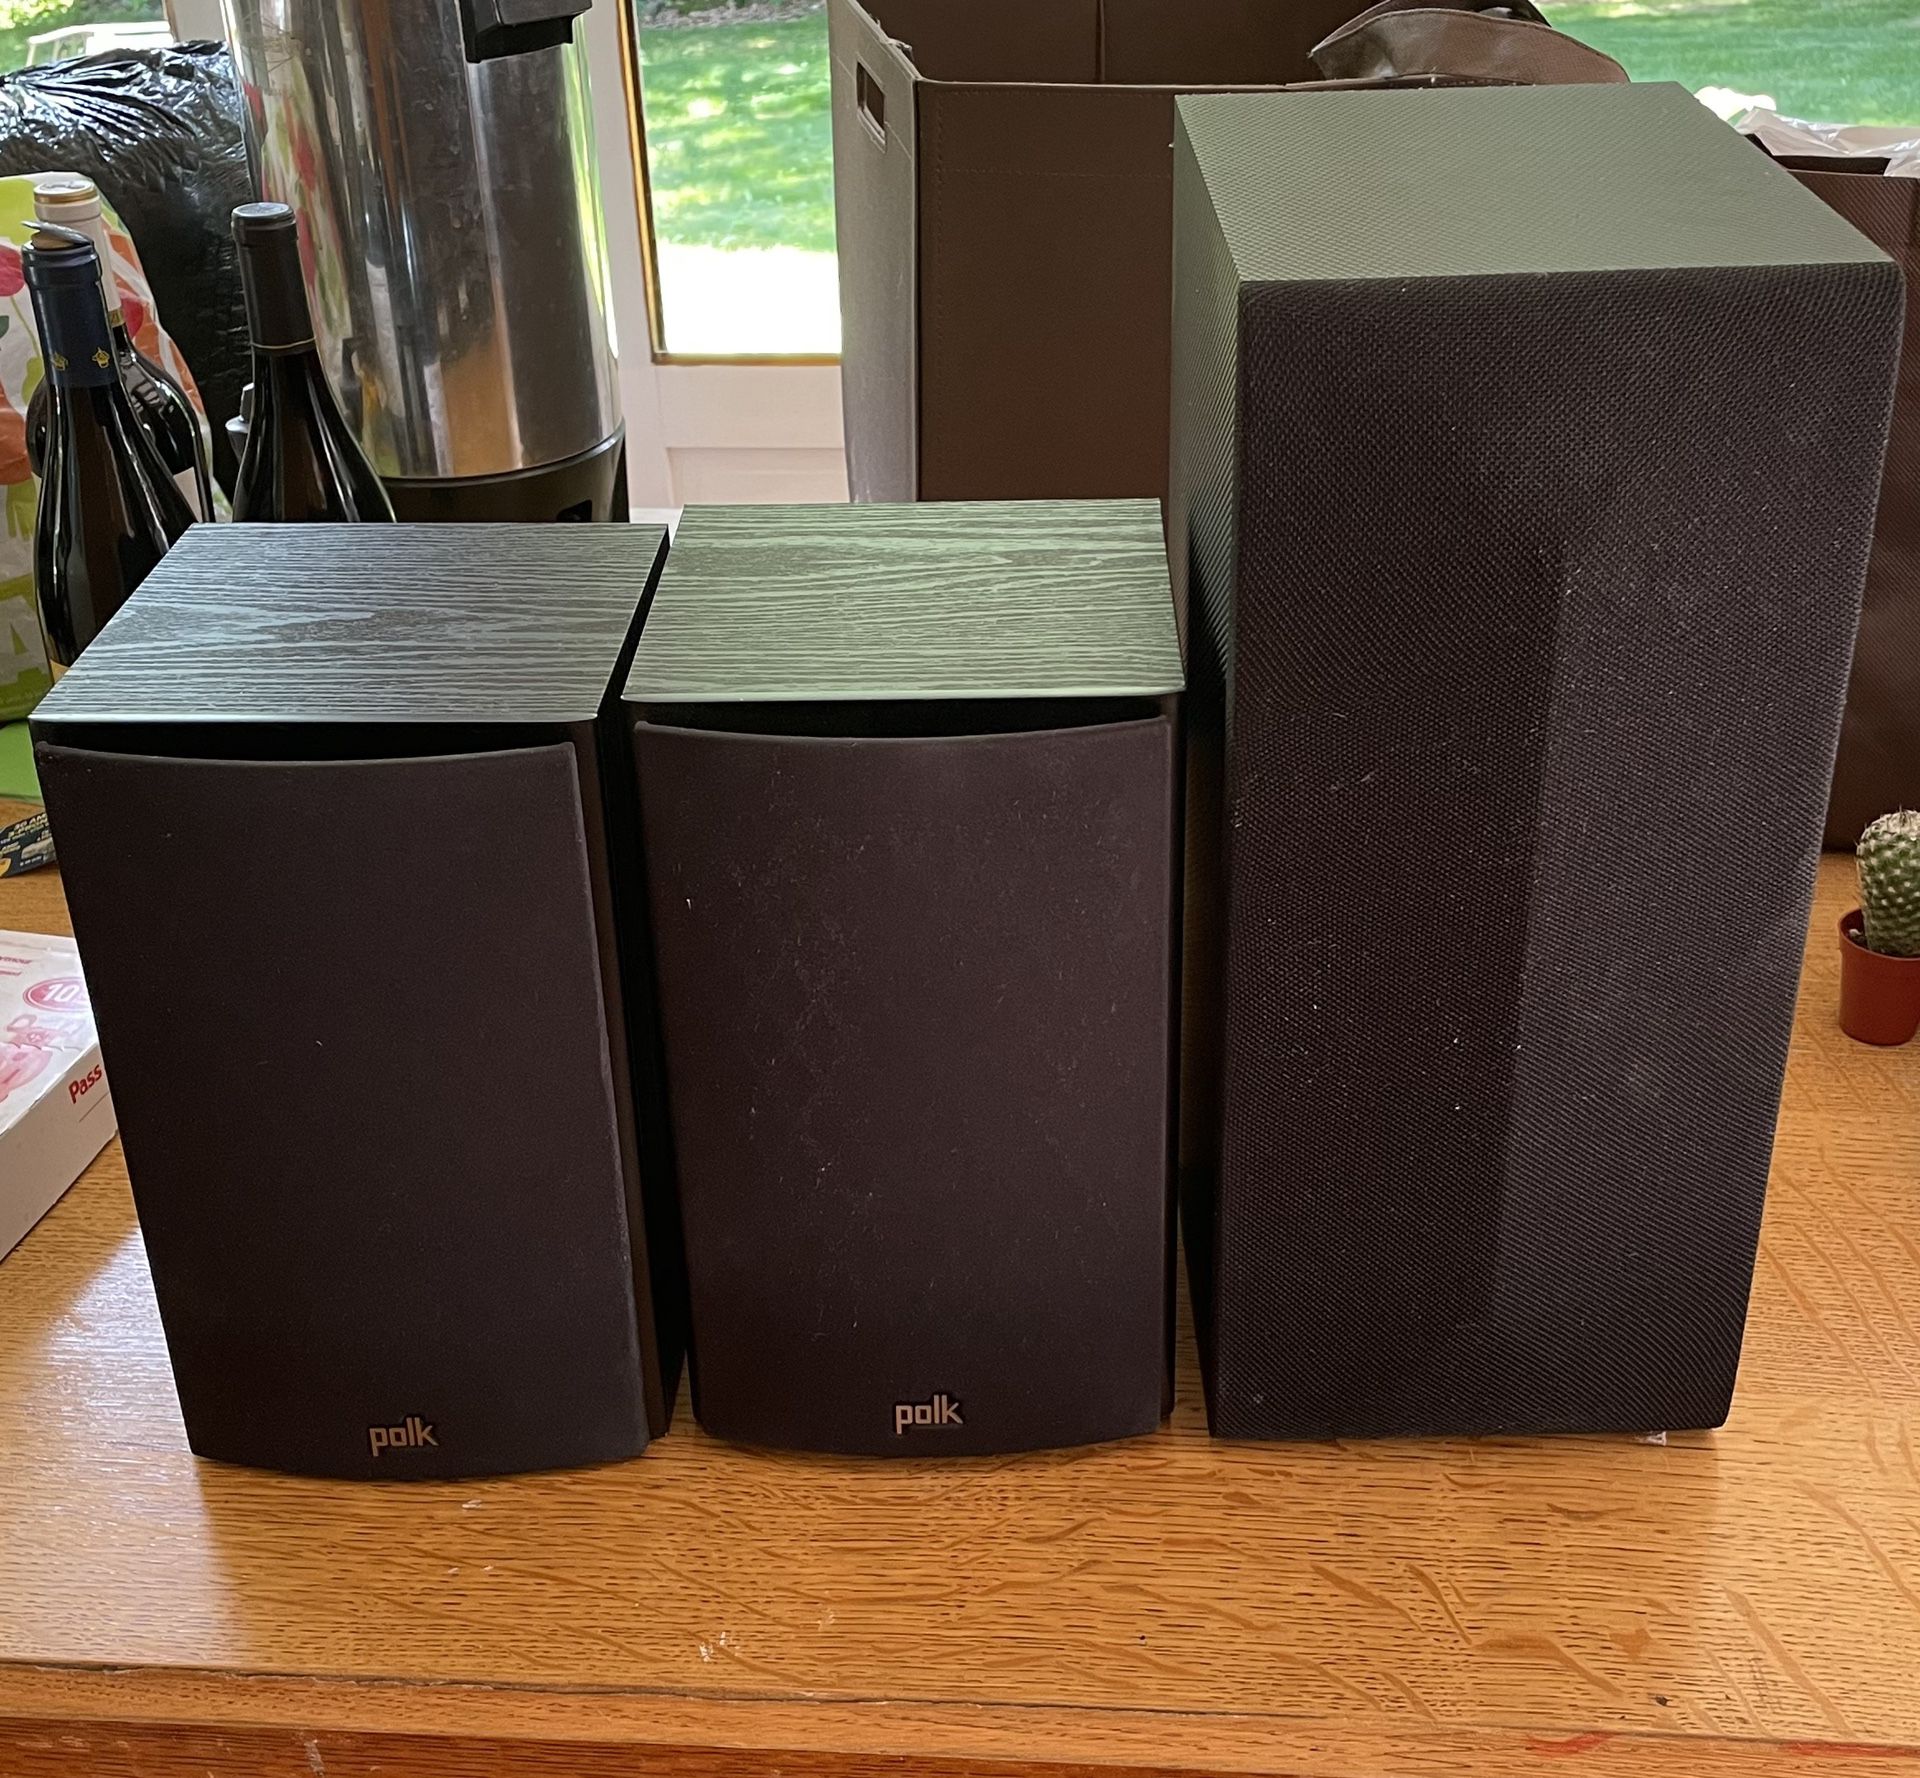 Polk Speakers (2) And Wireless Subwoofer (LG)